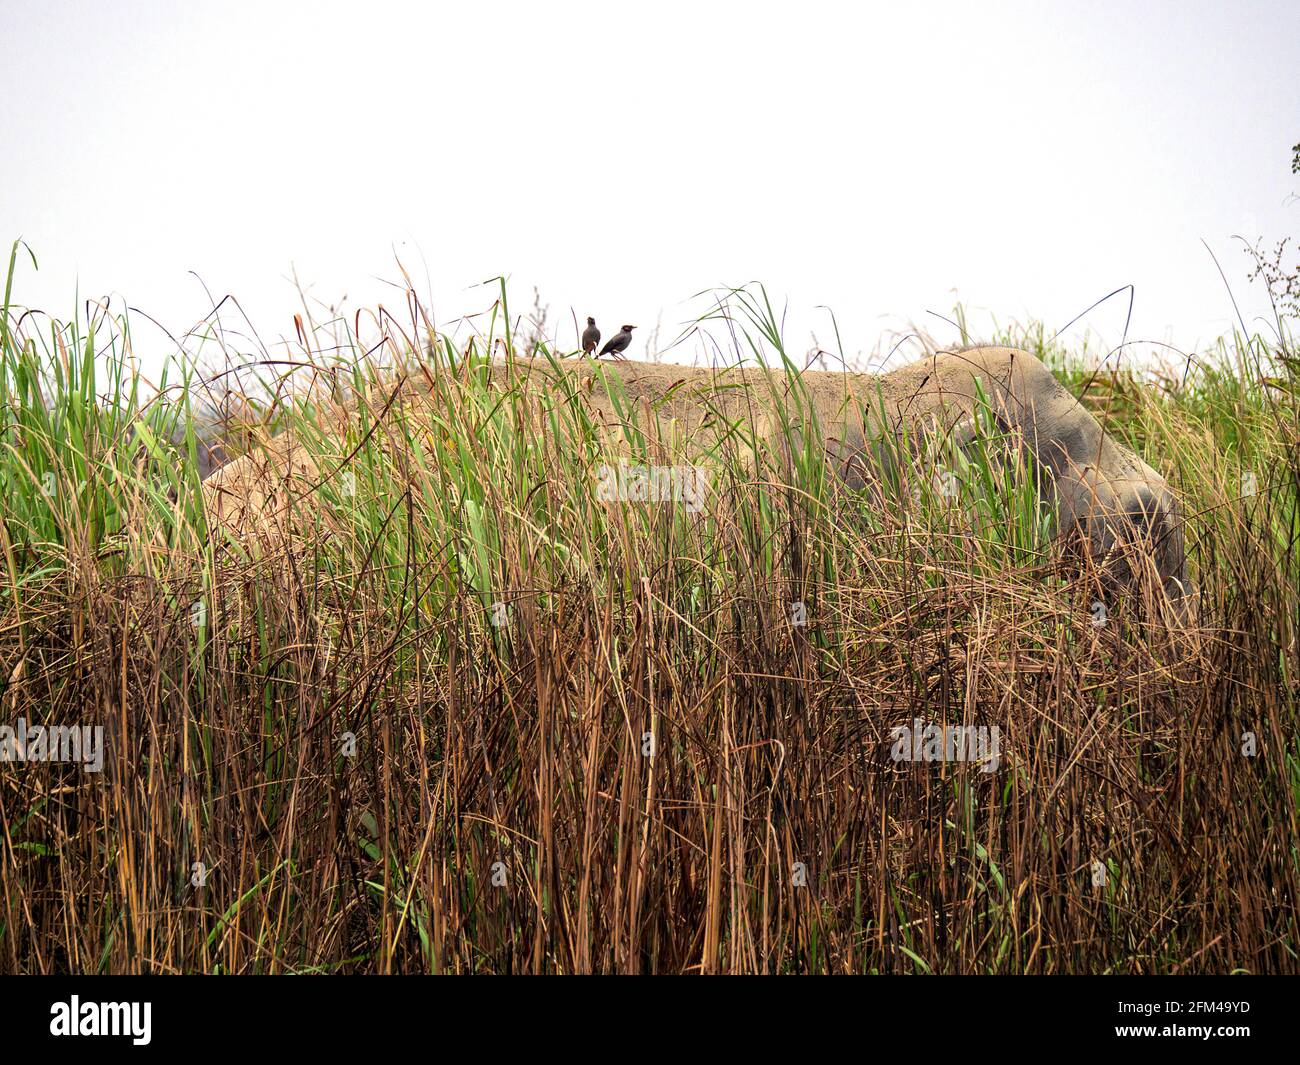 Tusker Wild Elephant in Elephant Grass in Forest at Kaziranga National Park, Assam, India with two birds sitting on him Stock Photo